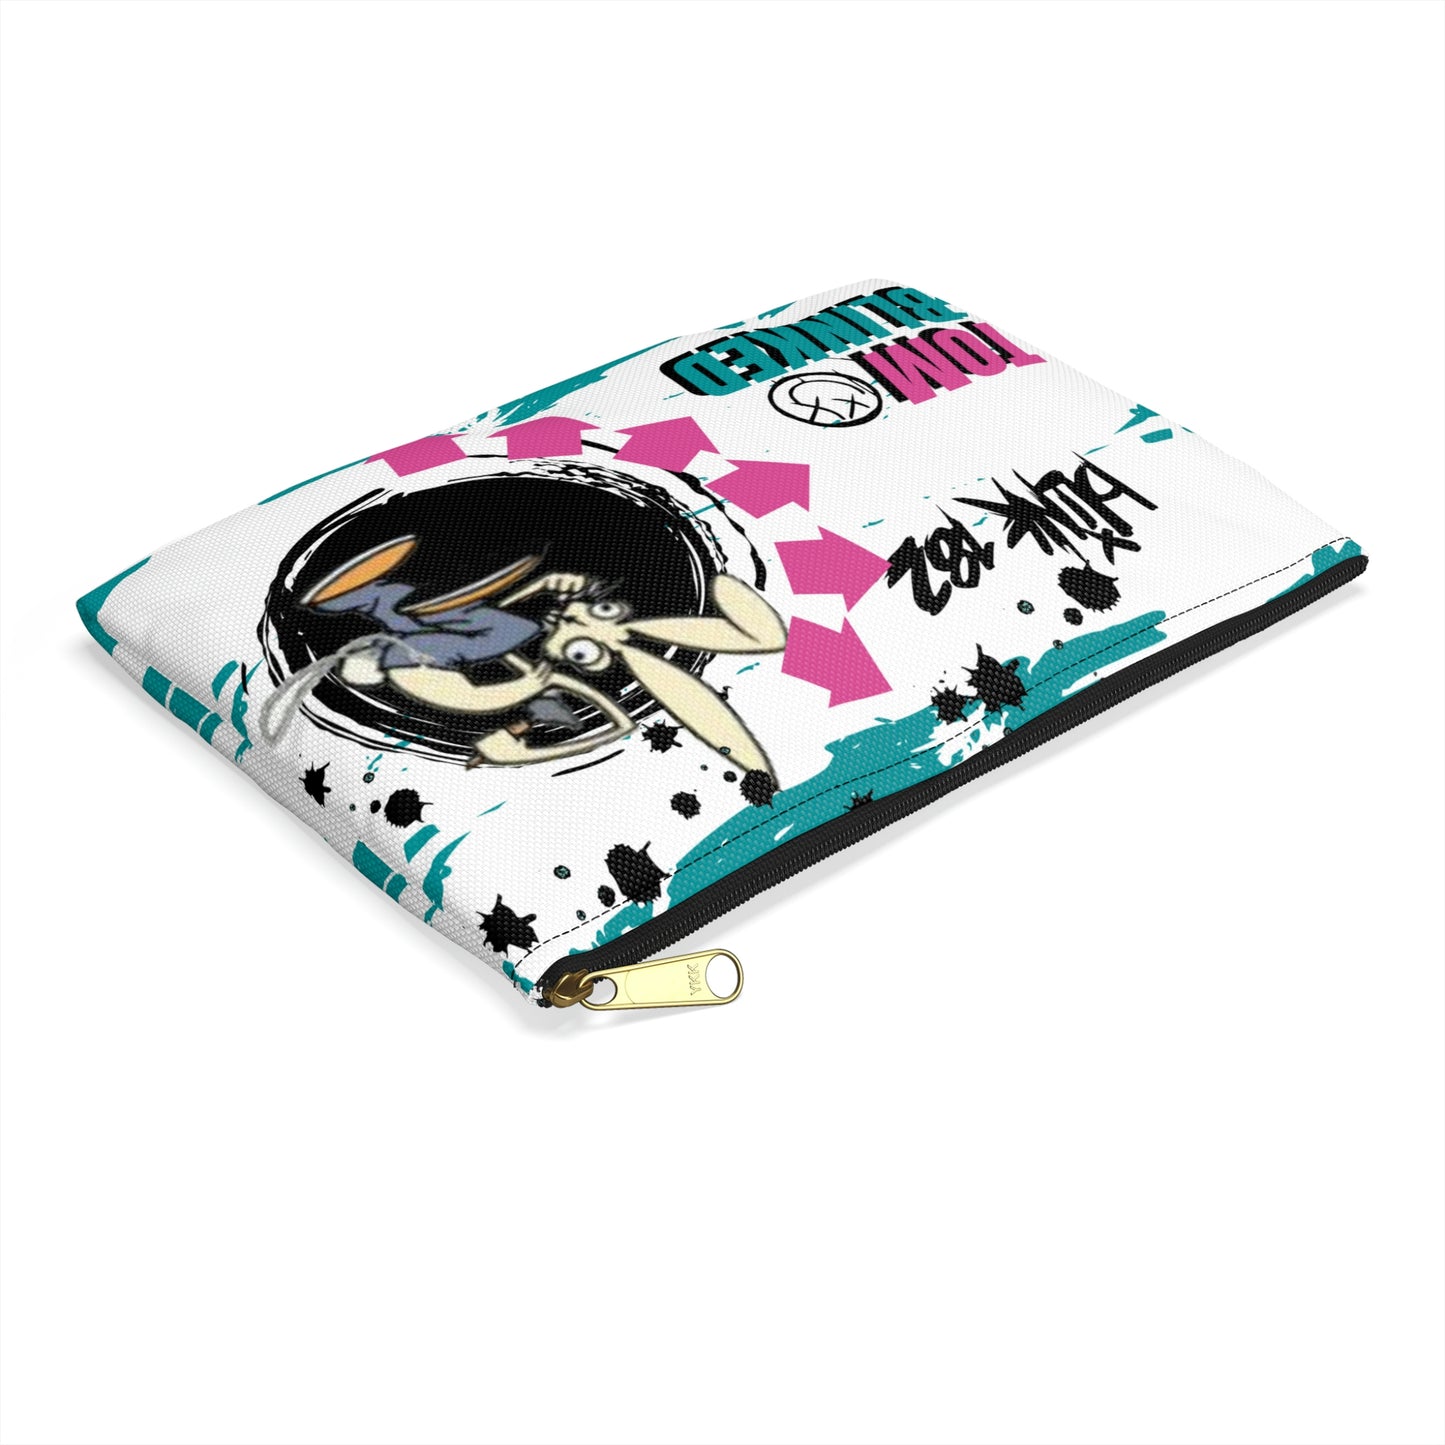 Blink 182 Accessory Pouch, All the Small Things Bag